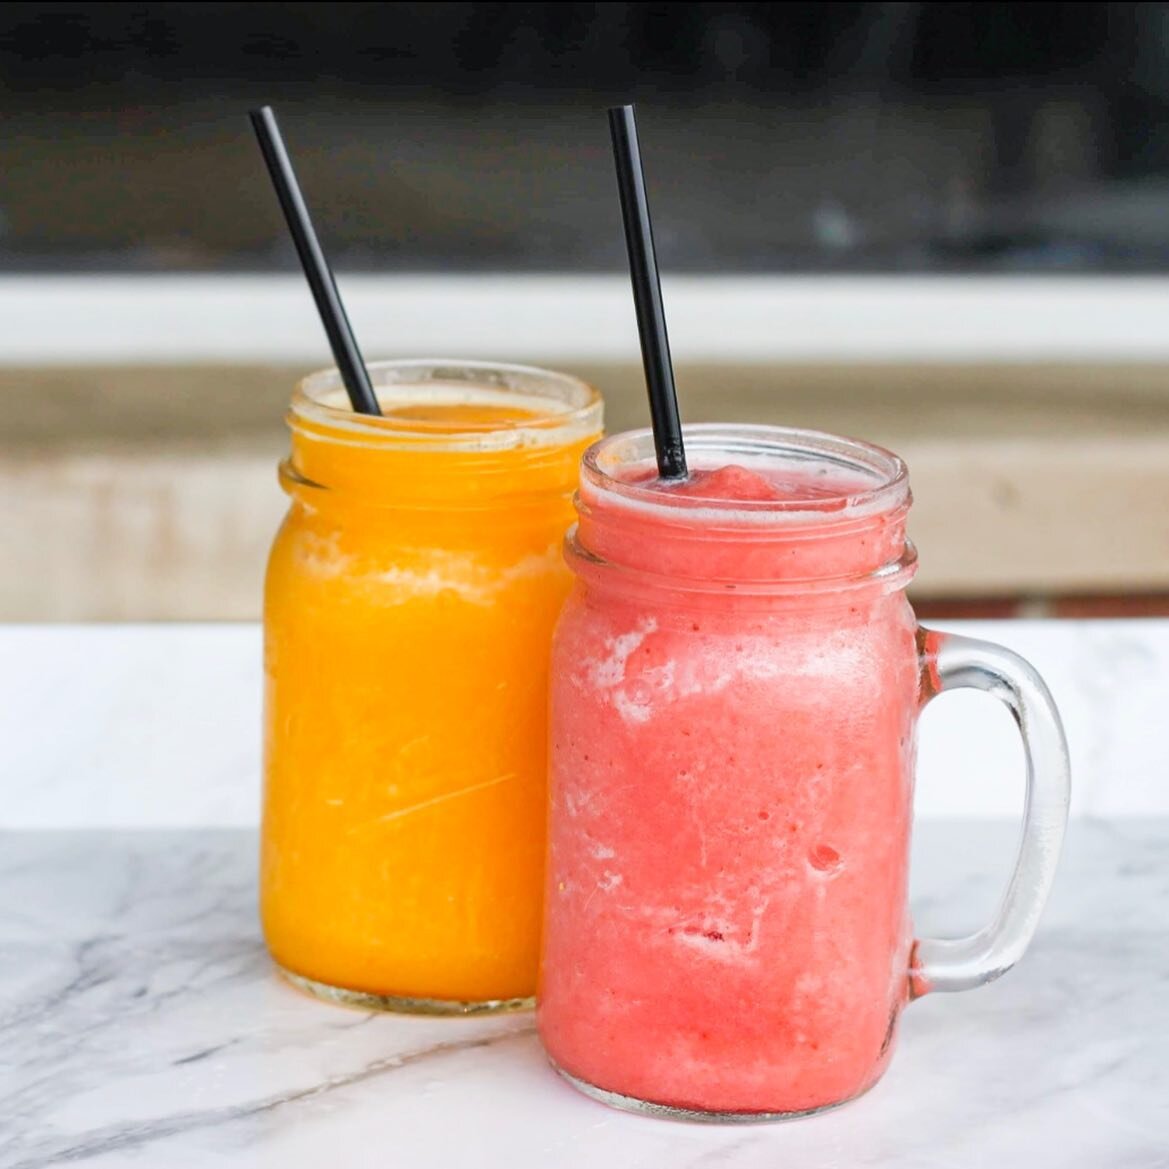 Check out our SUMMER MENU! We&rsquo;re excited to bring back smoothies, Italian Sodas, and Cream sodas. Refreshing, sweet, and fully embracing summer. ☀️ Enjoy them starting tomorrow, May 3rd! 
Smoothie flavors:
🔸Strawberry Banana
🔸Peach
🔸Mango
🔸